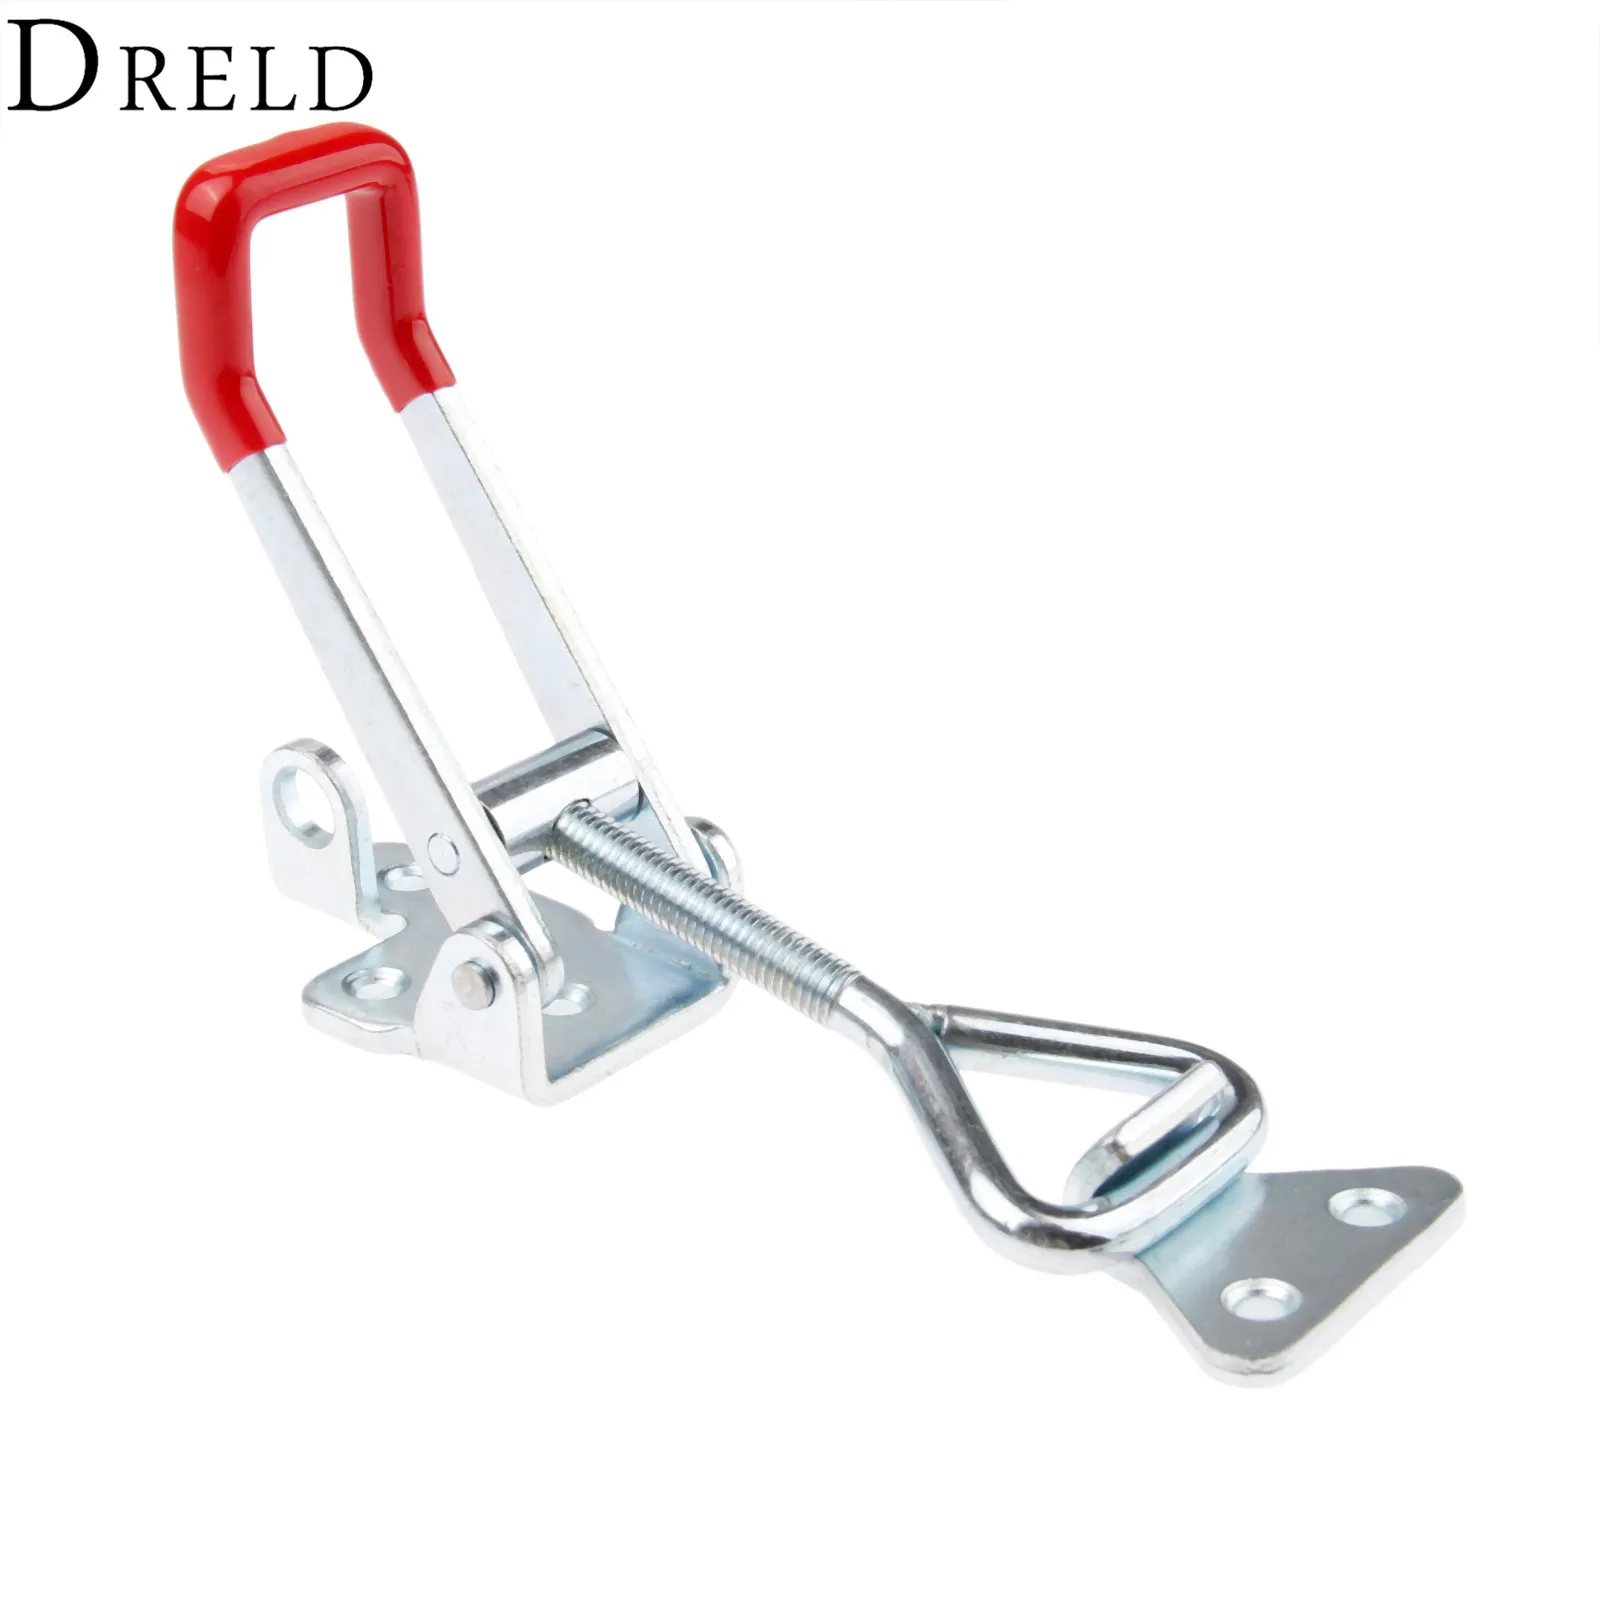 

DRELD 1pc GH-4003 Parighasana Toggle Clamp Clip 300KG/661Lbs Holding Capacity Quick Metal Latch Hand Tool Fixture Clamp